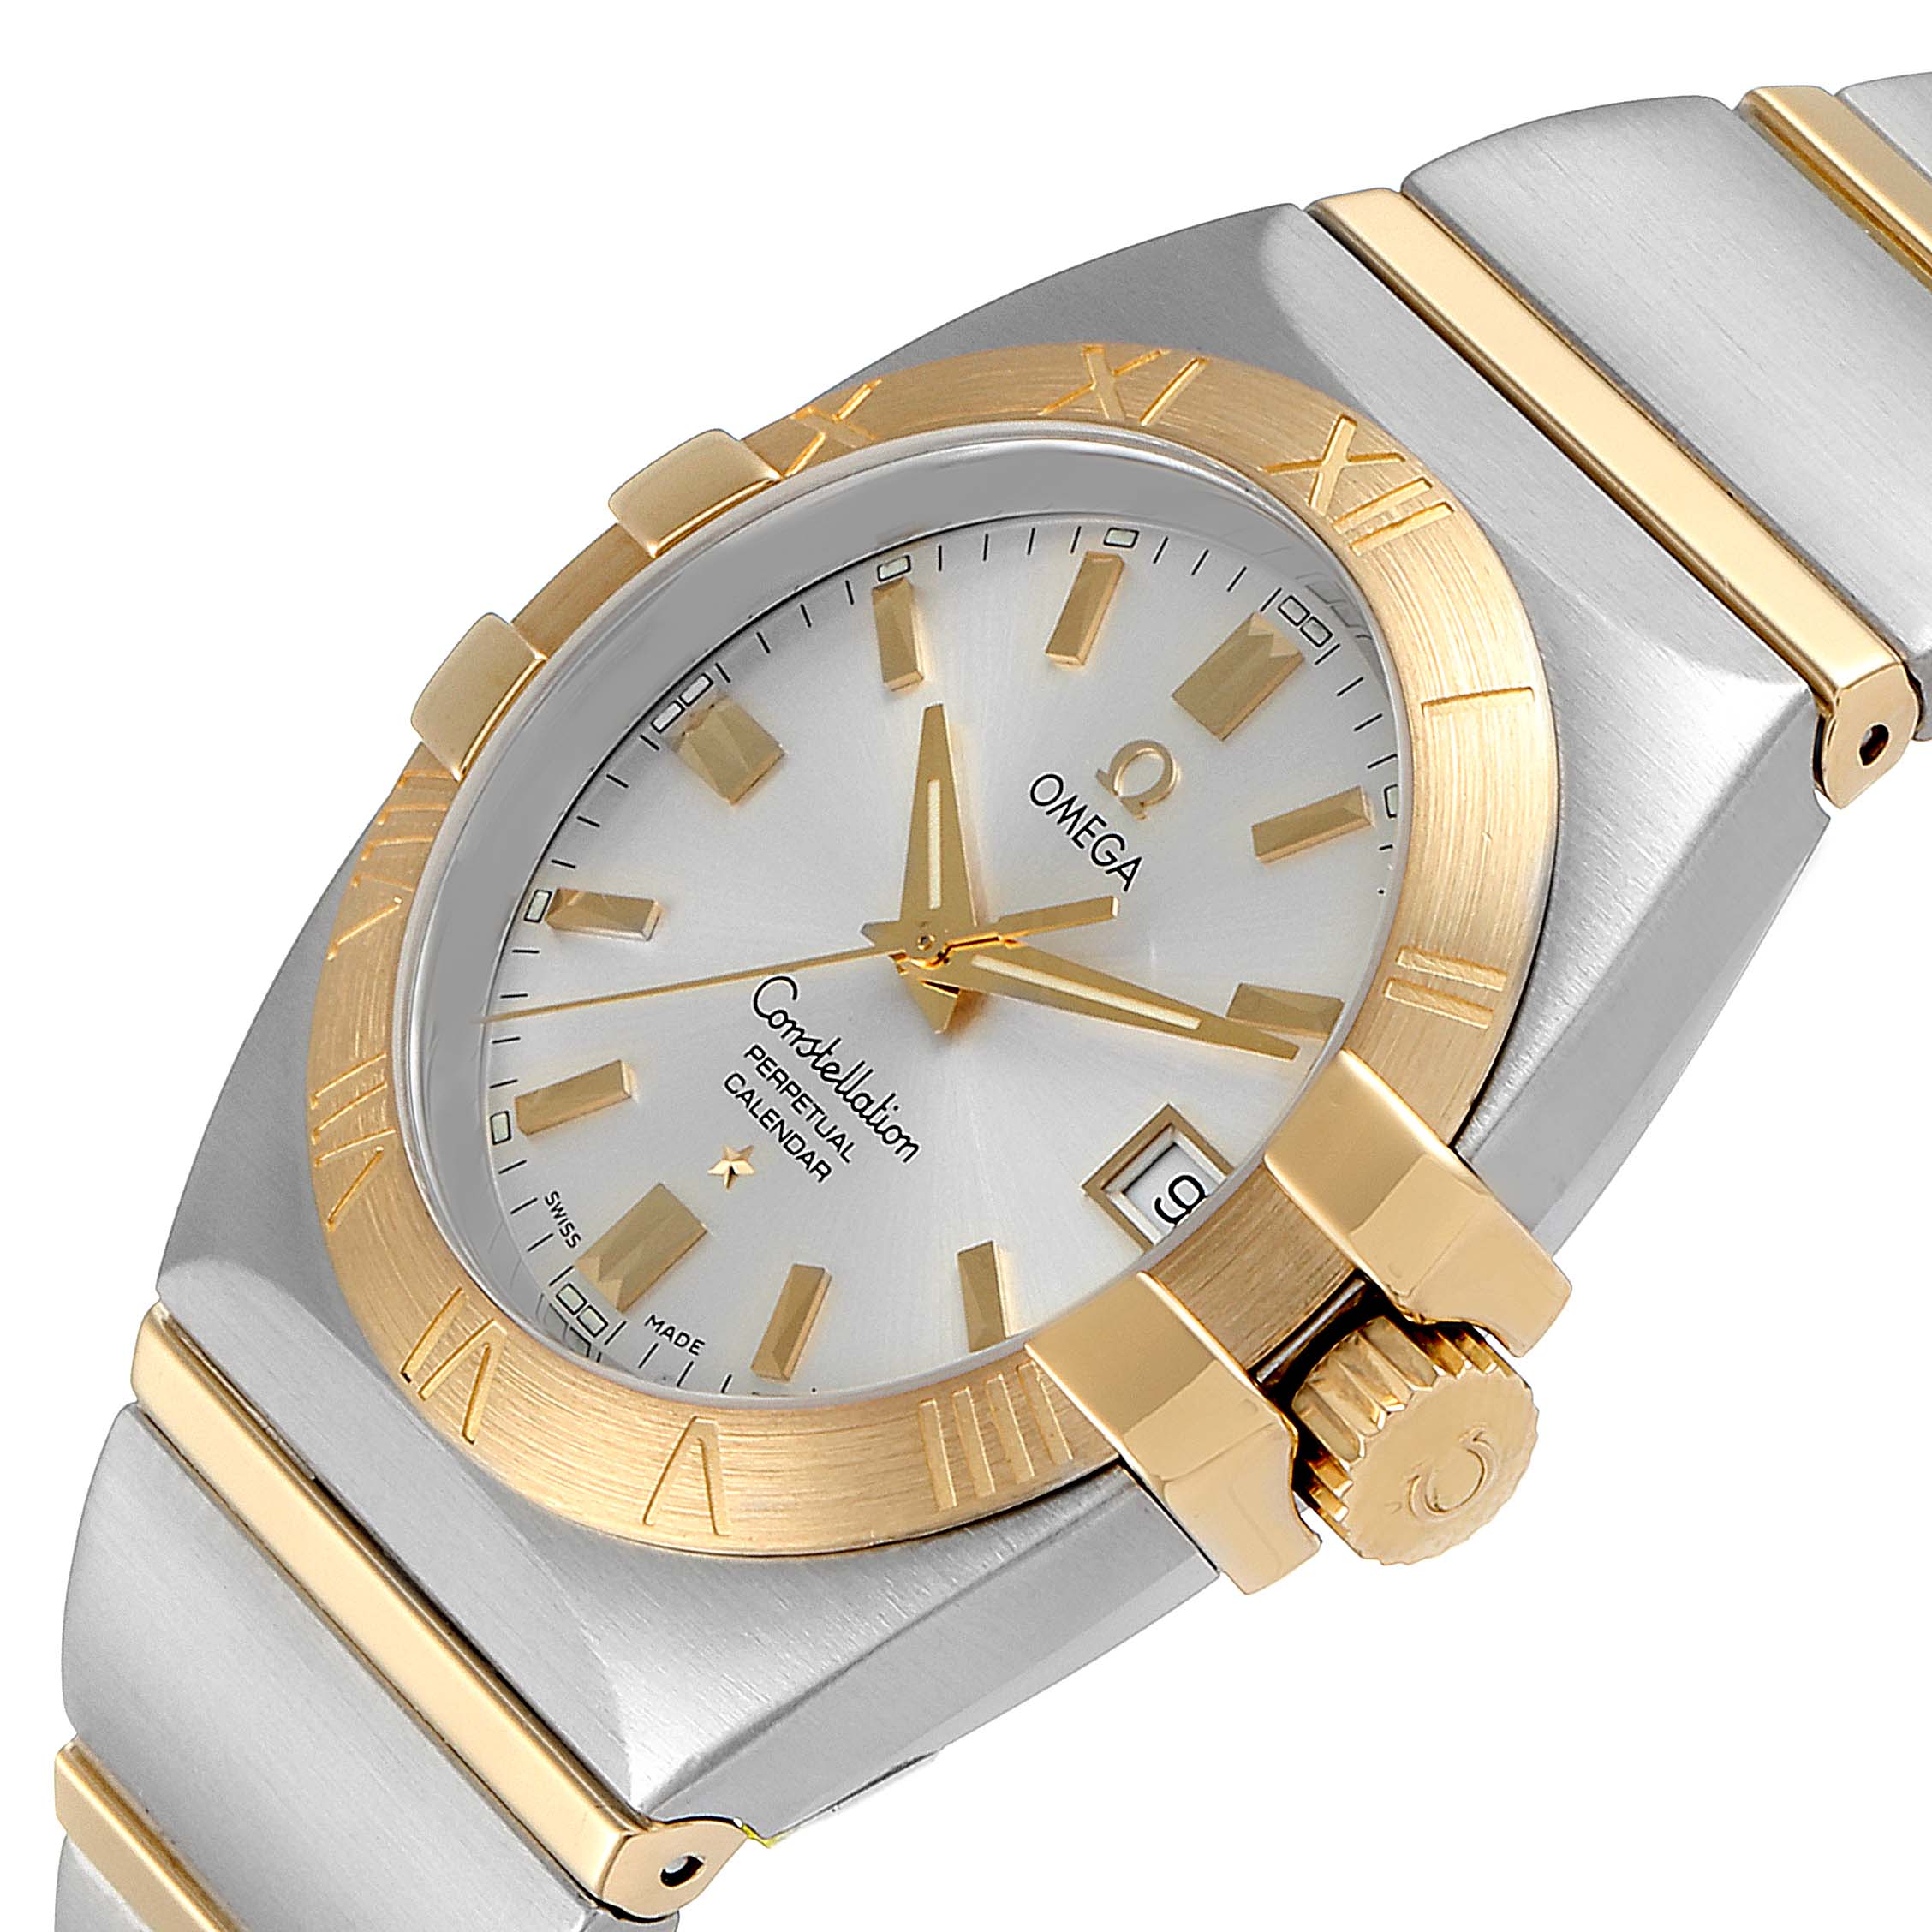 omega constellation double eagle mens watch